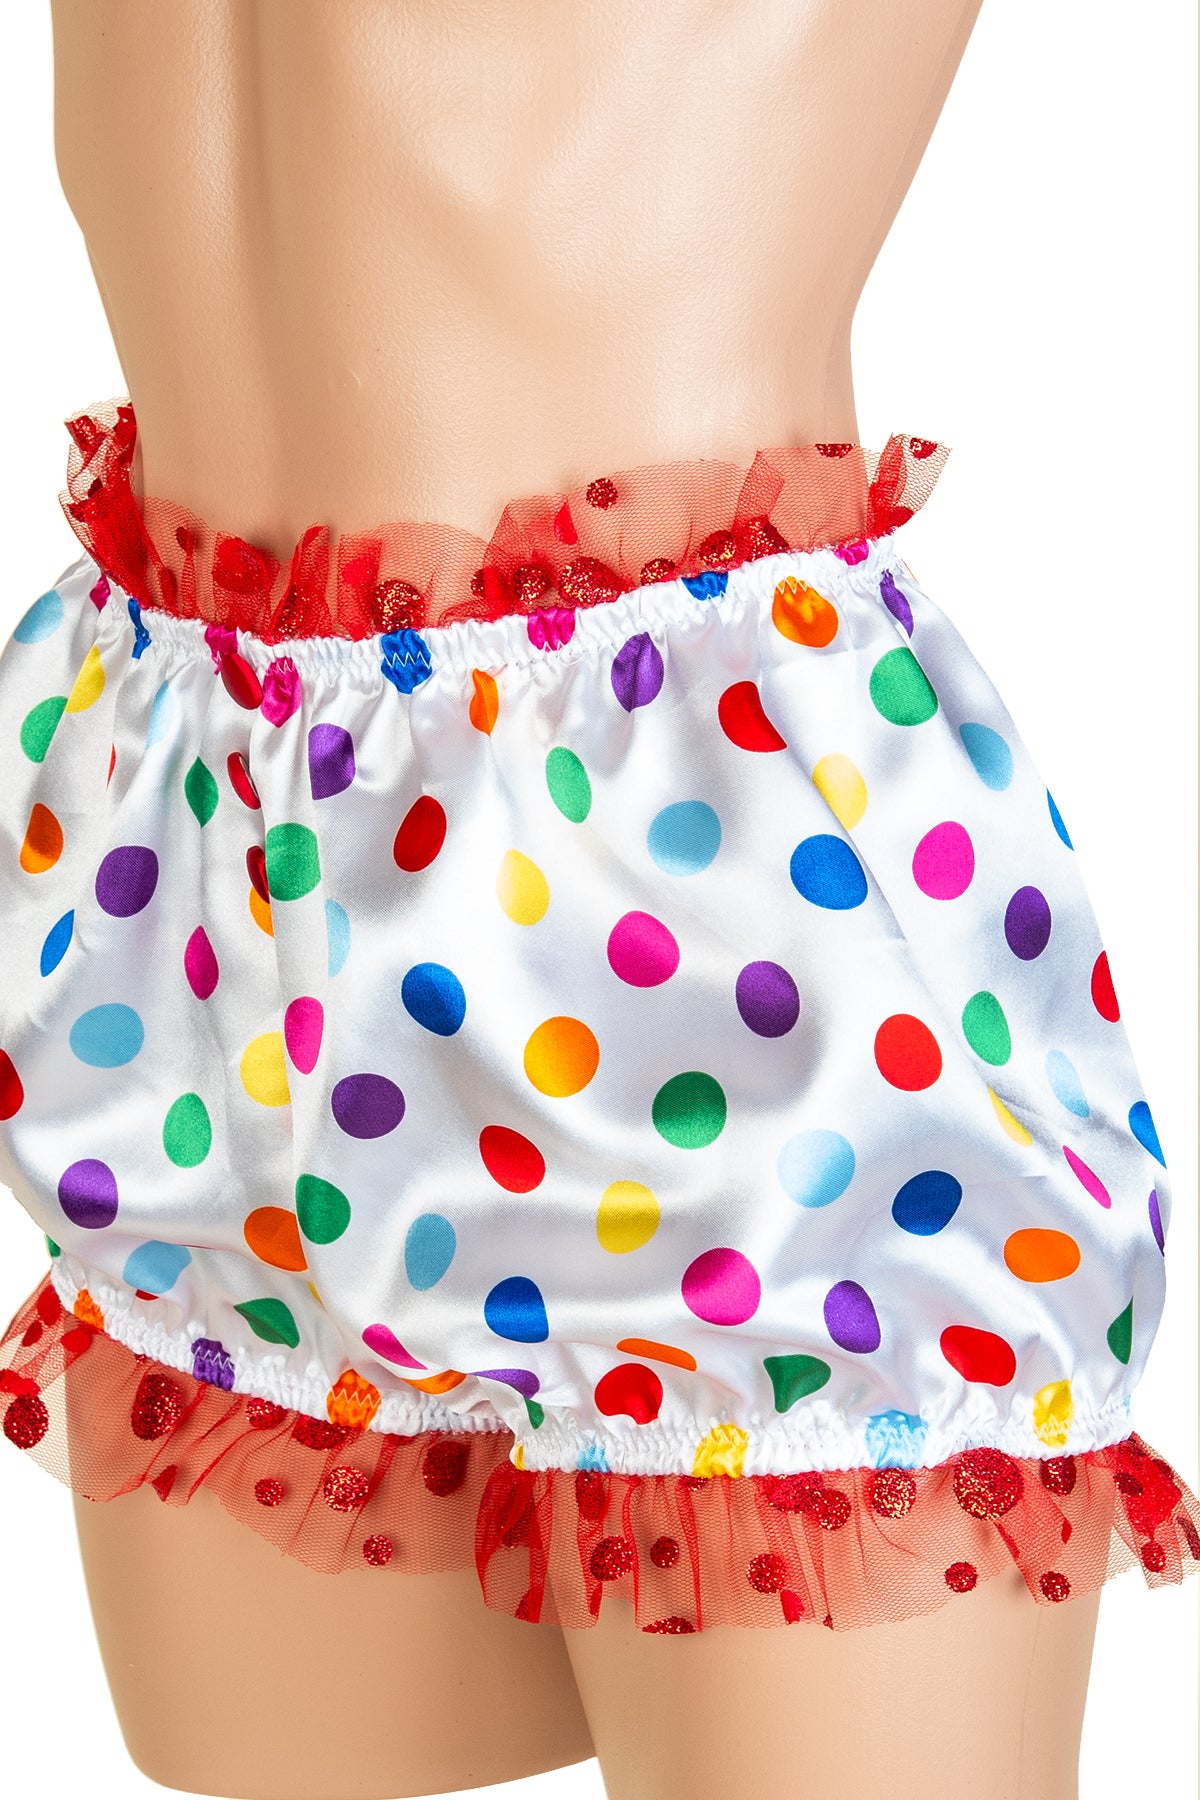 Circus Clown Bloomers